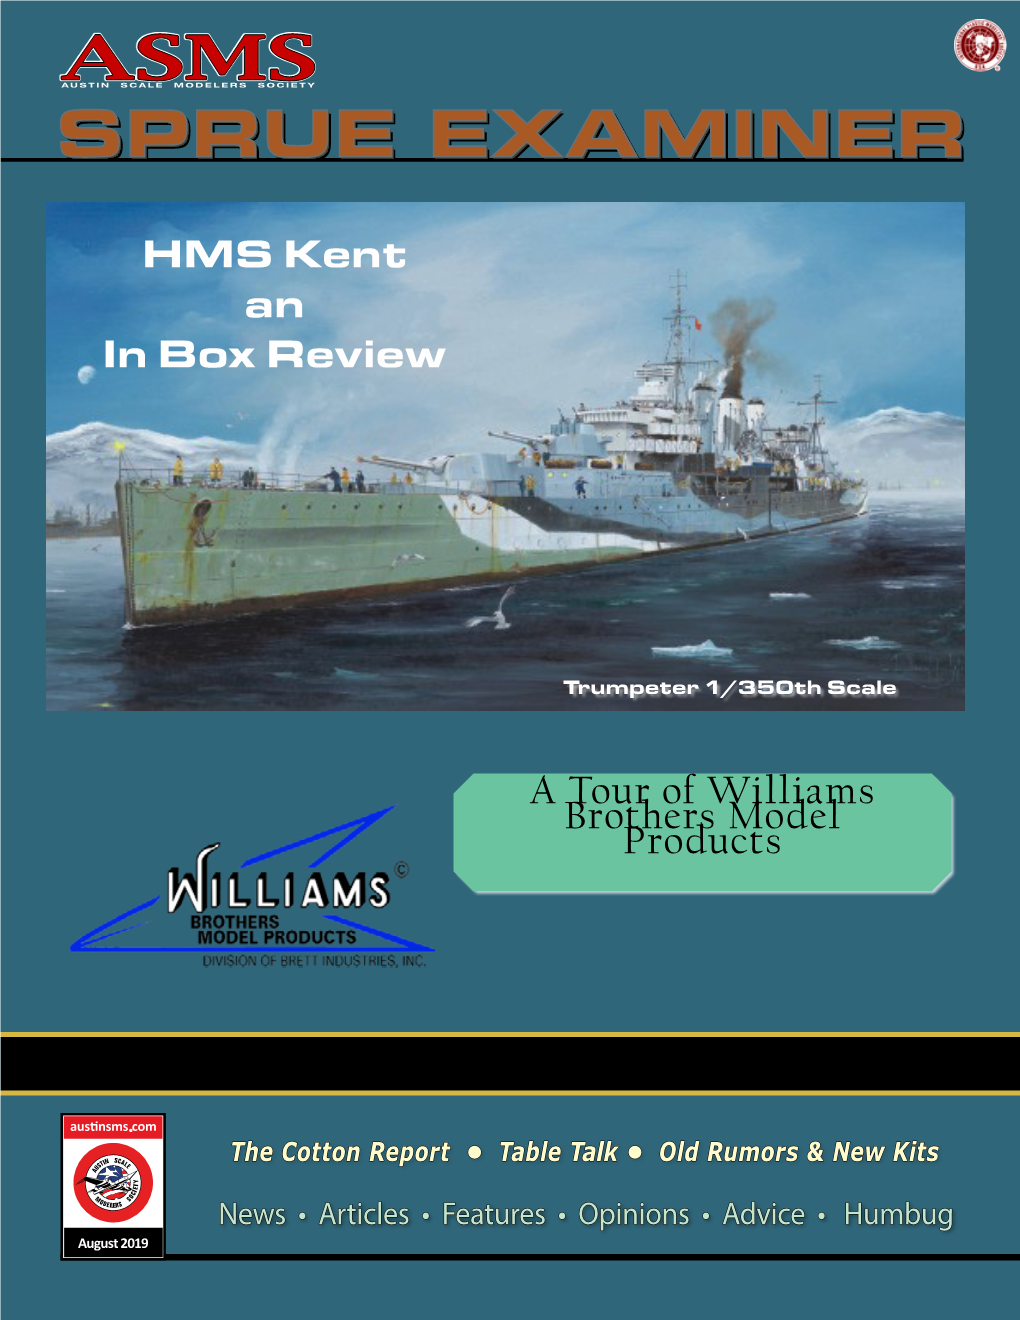 HMS Kent an in Box Review a Tour of Williams Brothers Model Products